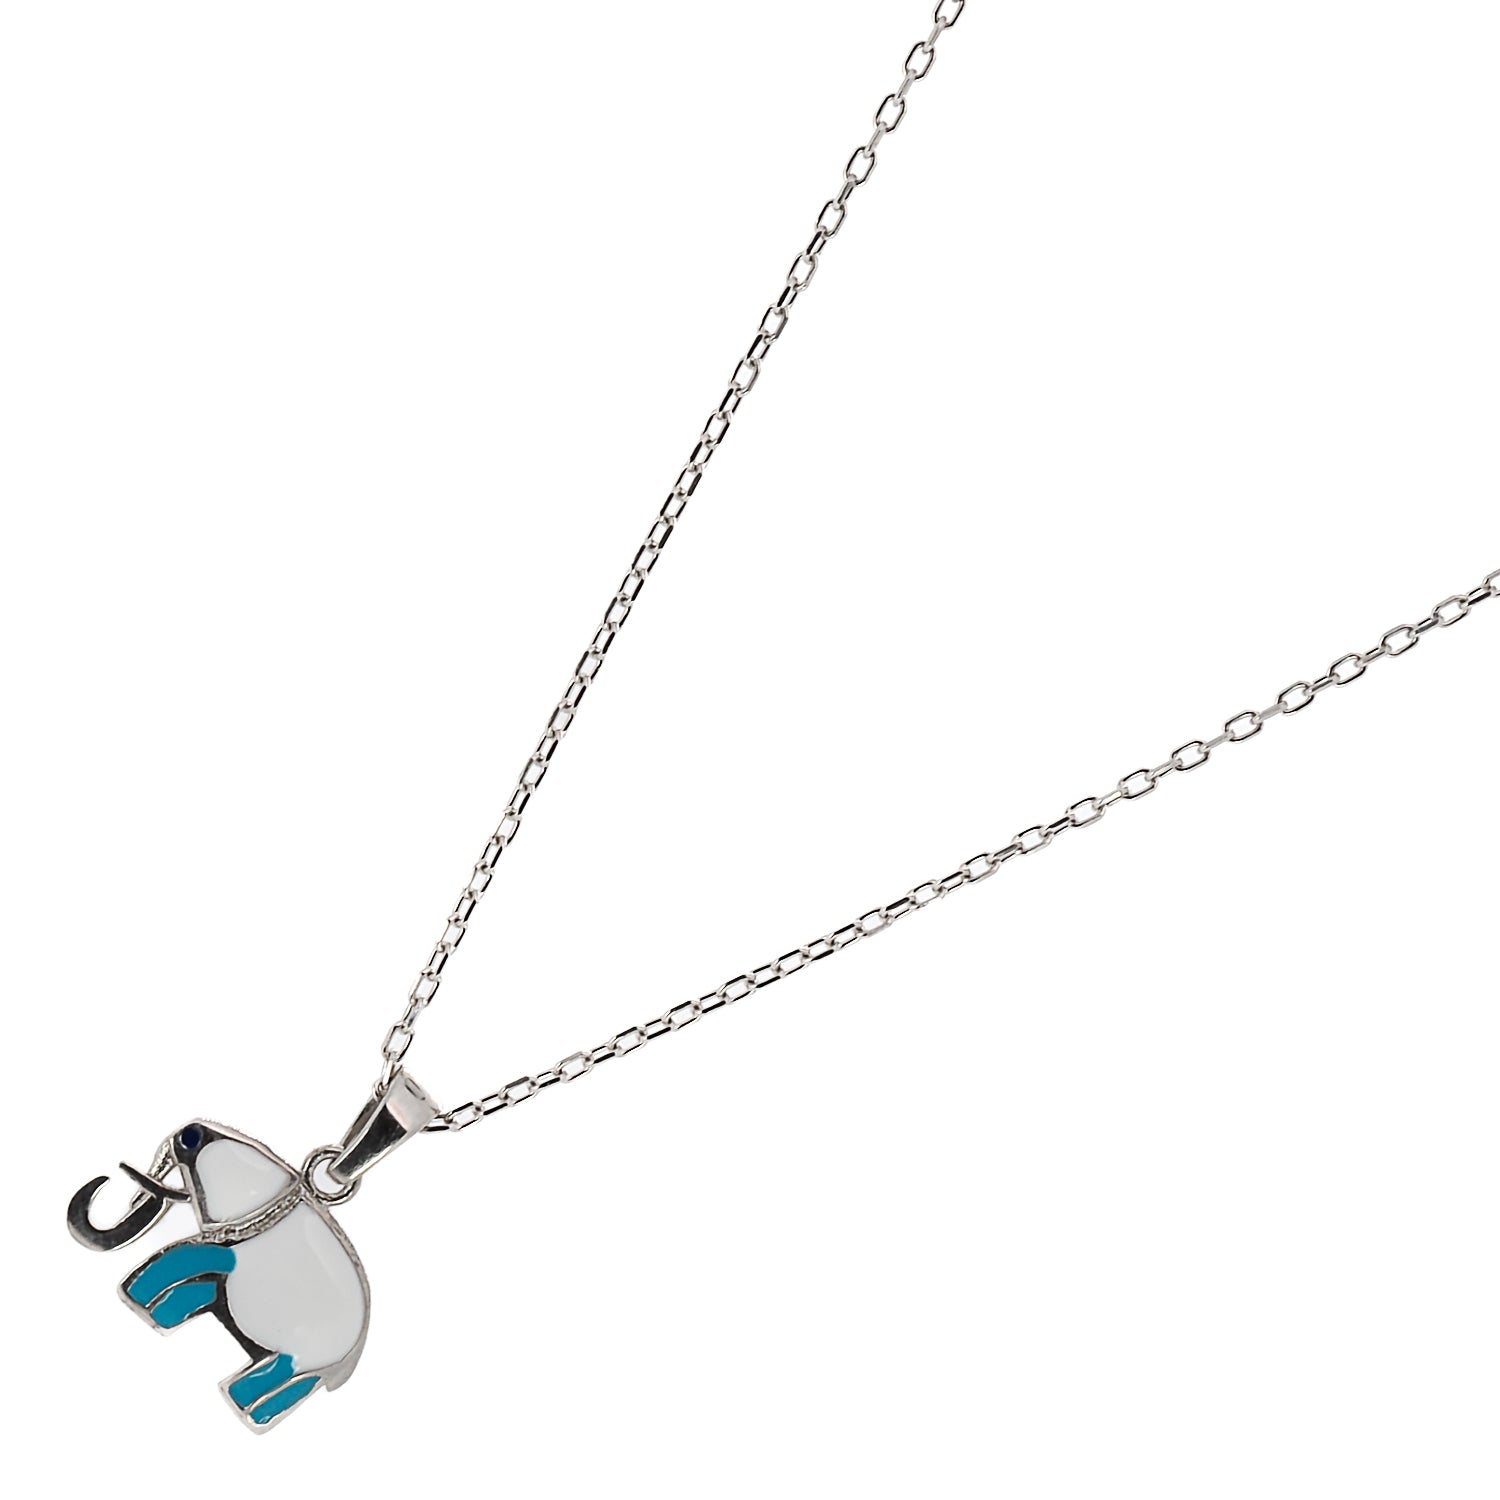 A top-down view of the Sterling Silver Turquoise Elephant Necklace, highlighting its white and turquoise enamel details.